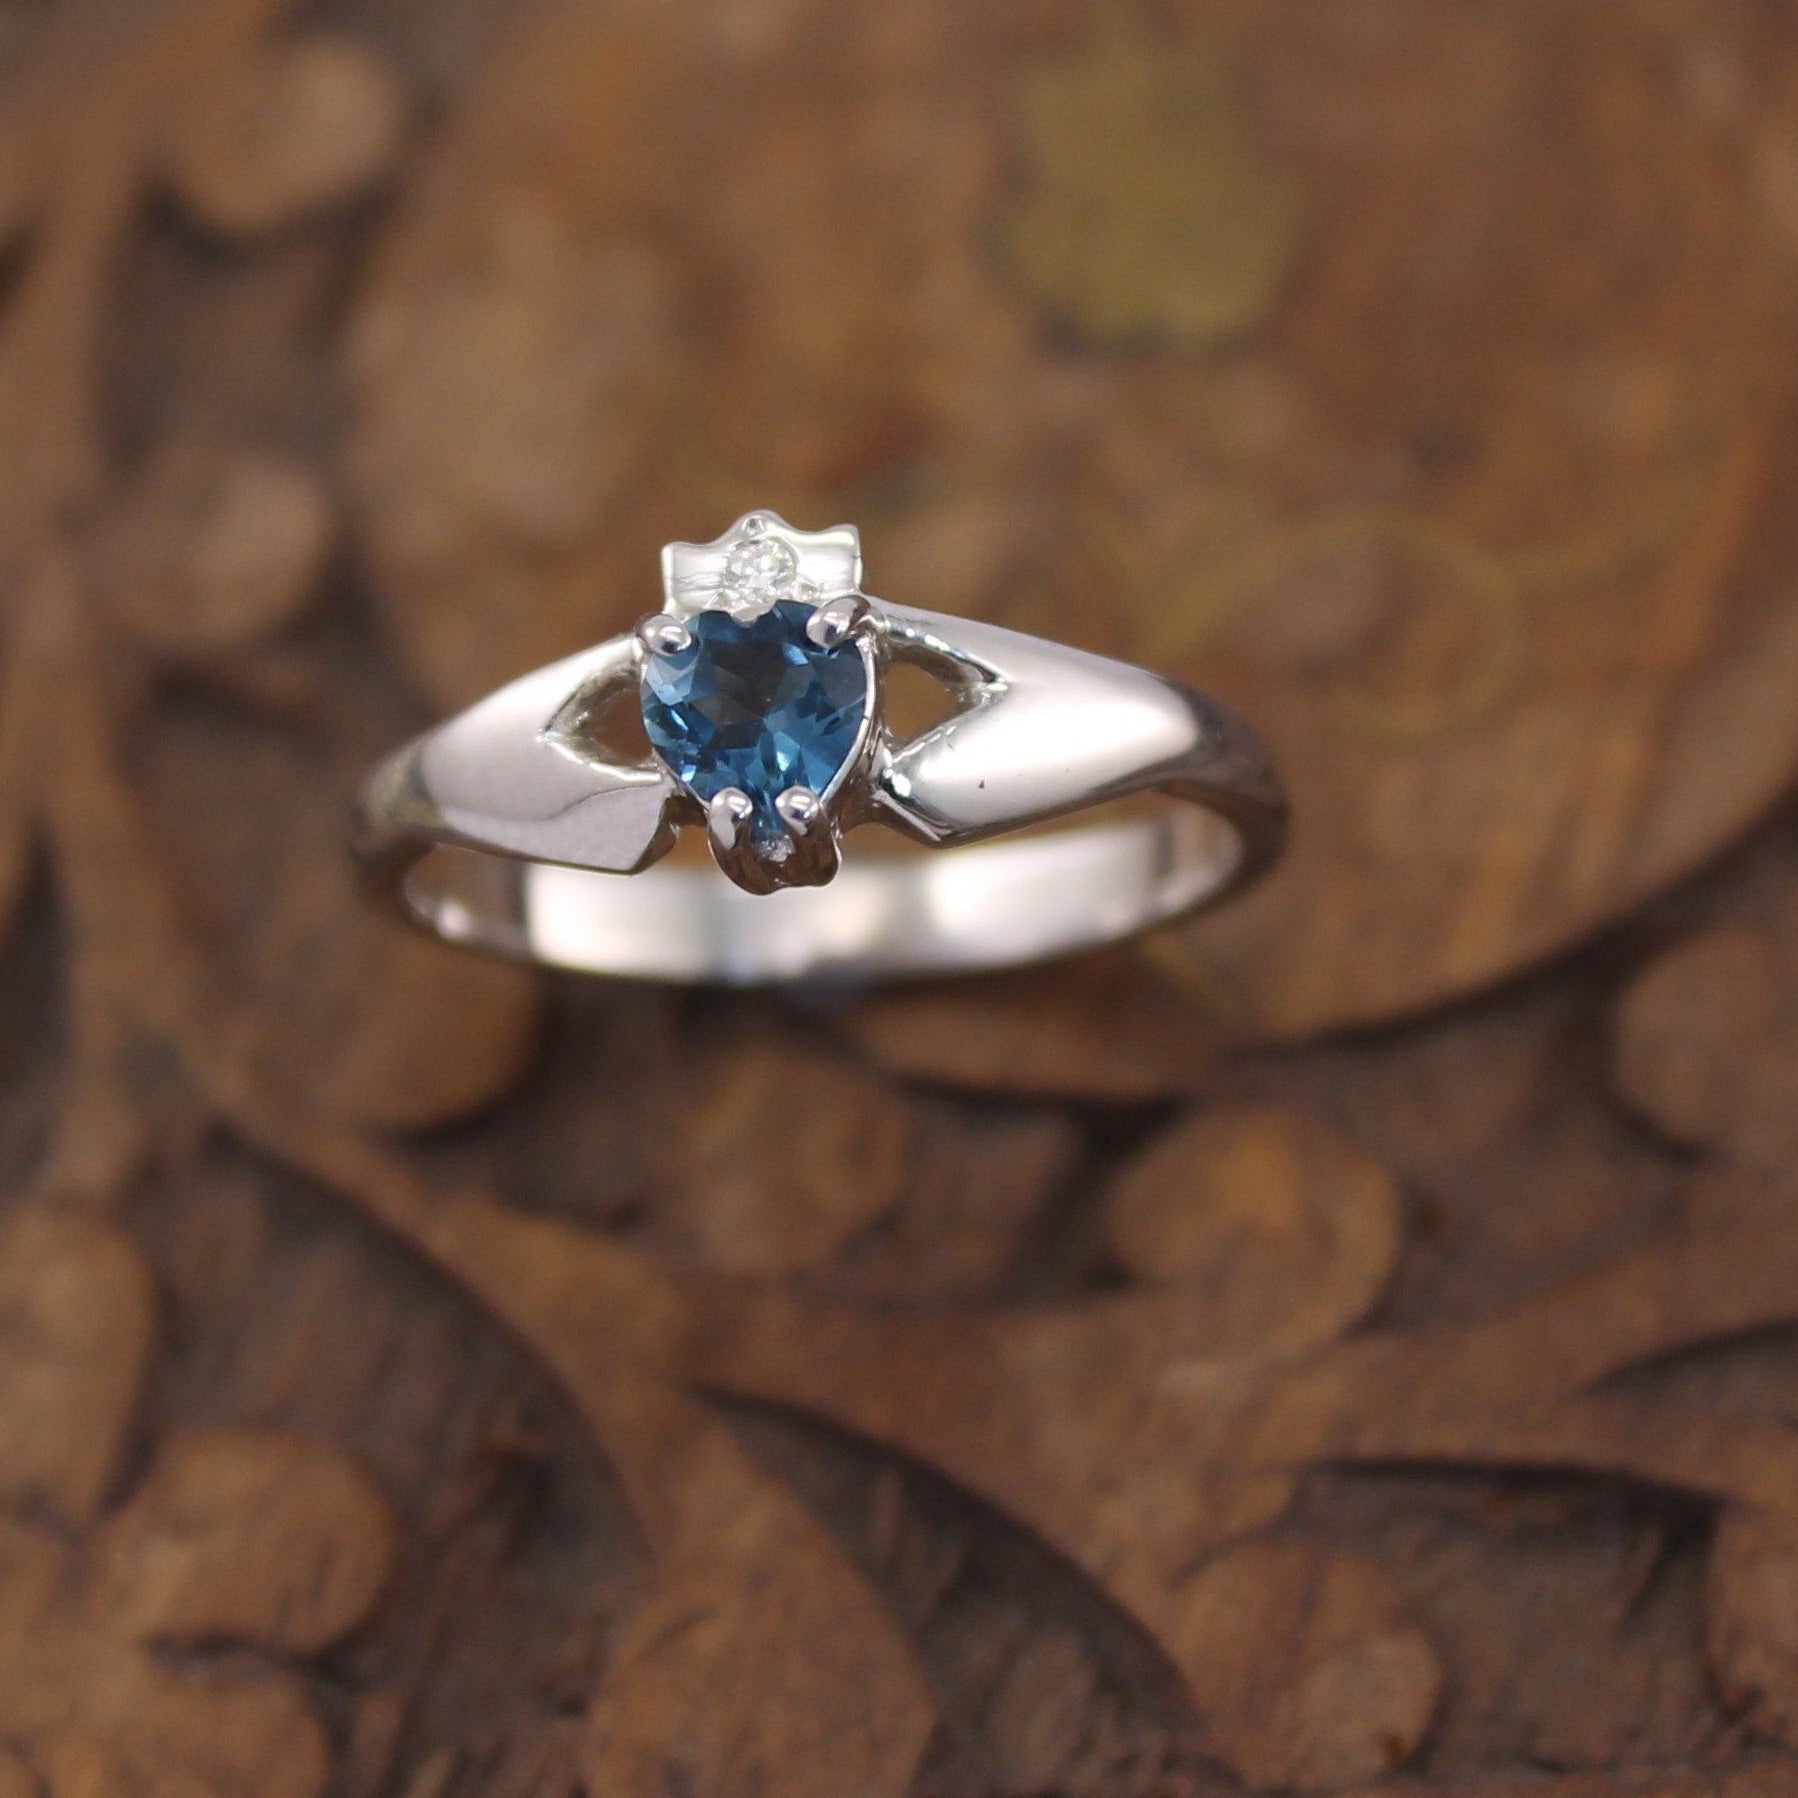 Jewelry - Claddagh Ring, Real Blue Topaz And Diamond Contemporary Claddagh Ring